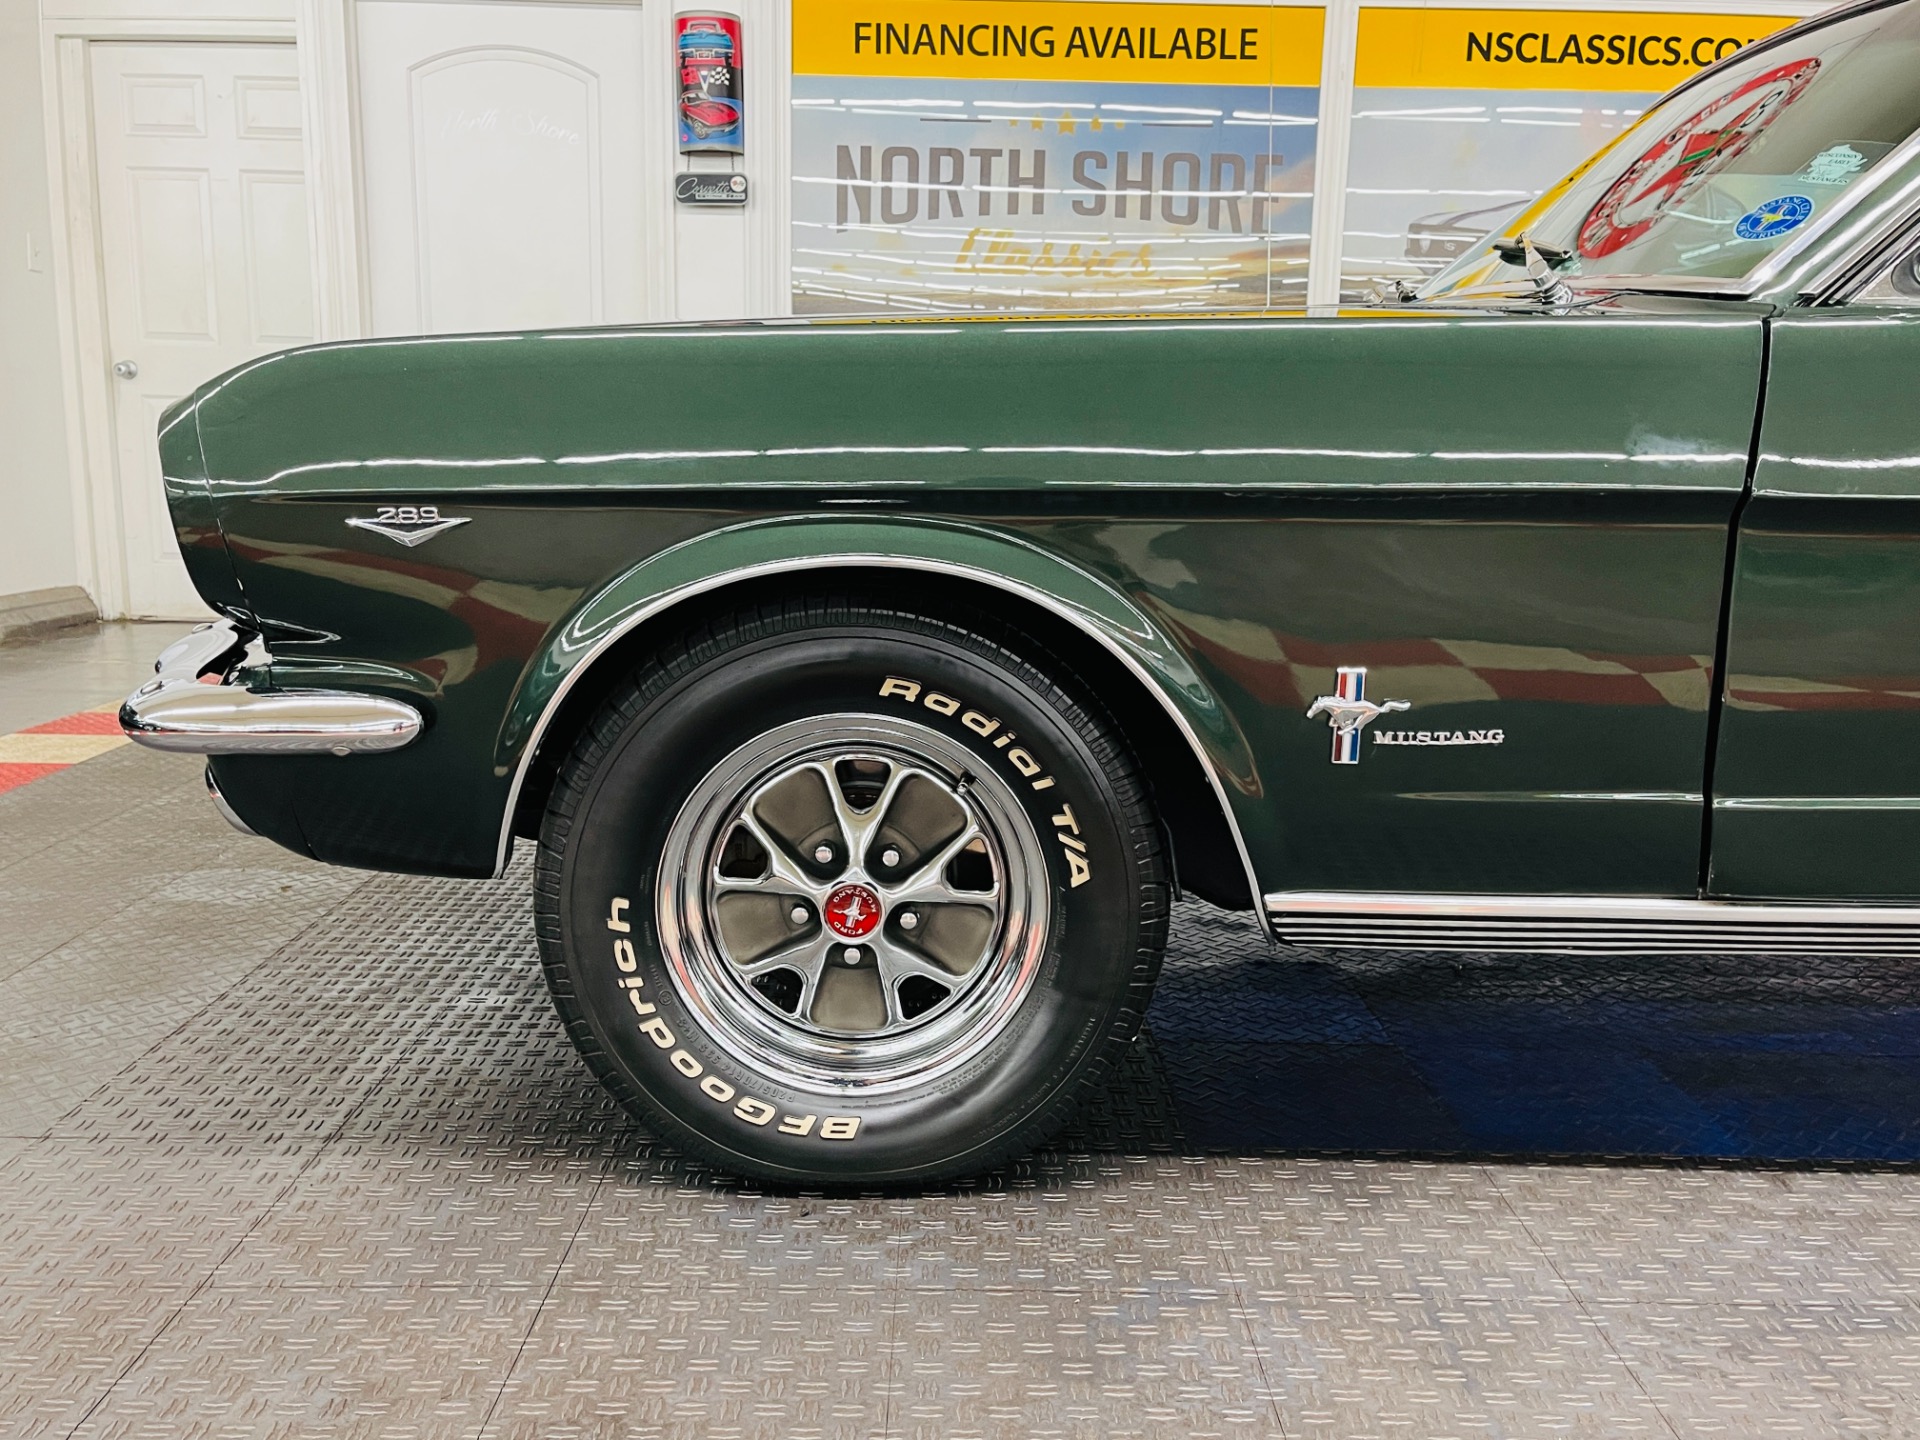 Used 1965 Ford Mustang - COMPLETE MECHANICAL RESTORATION - VERY NICE DRIVER - SEE VIDEO | Mundelein, IL